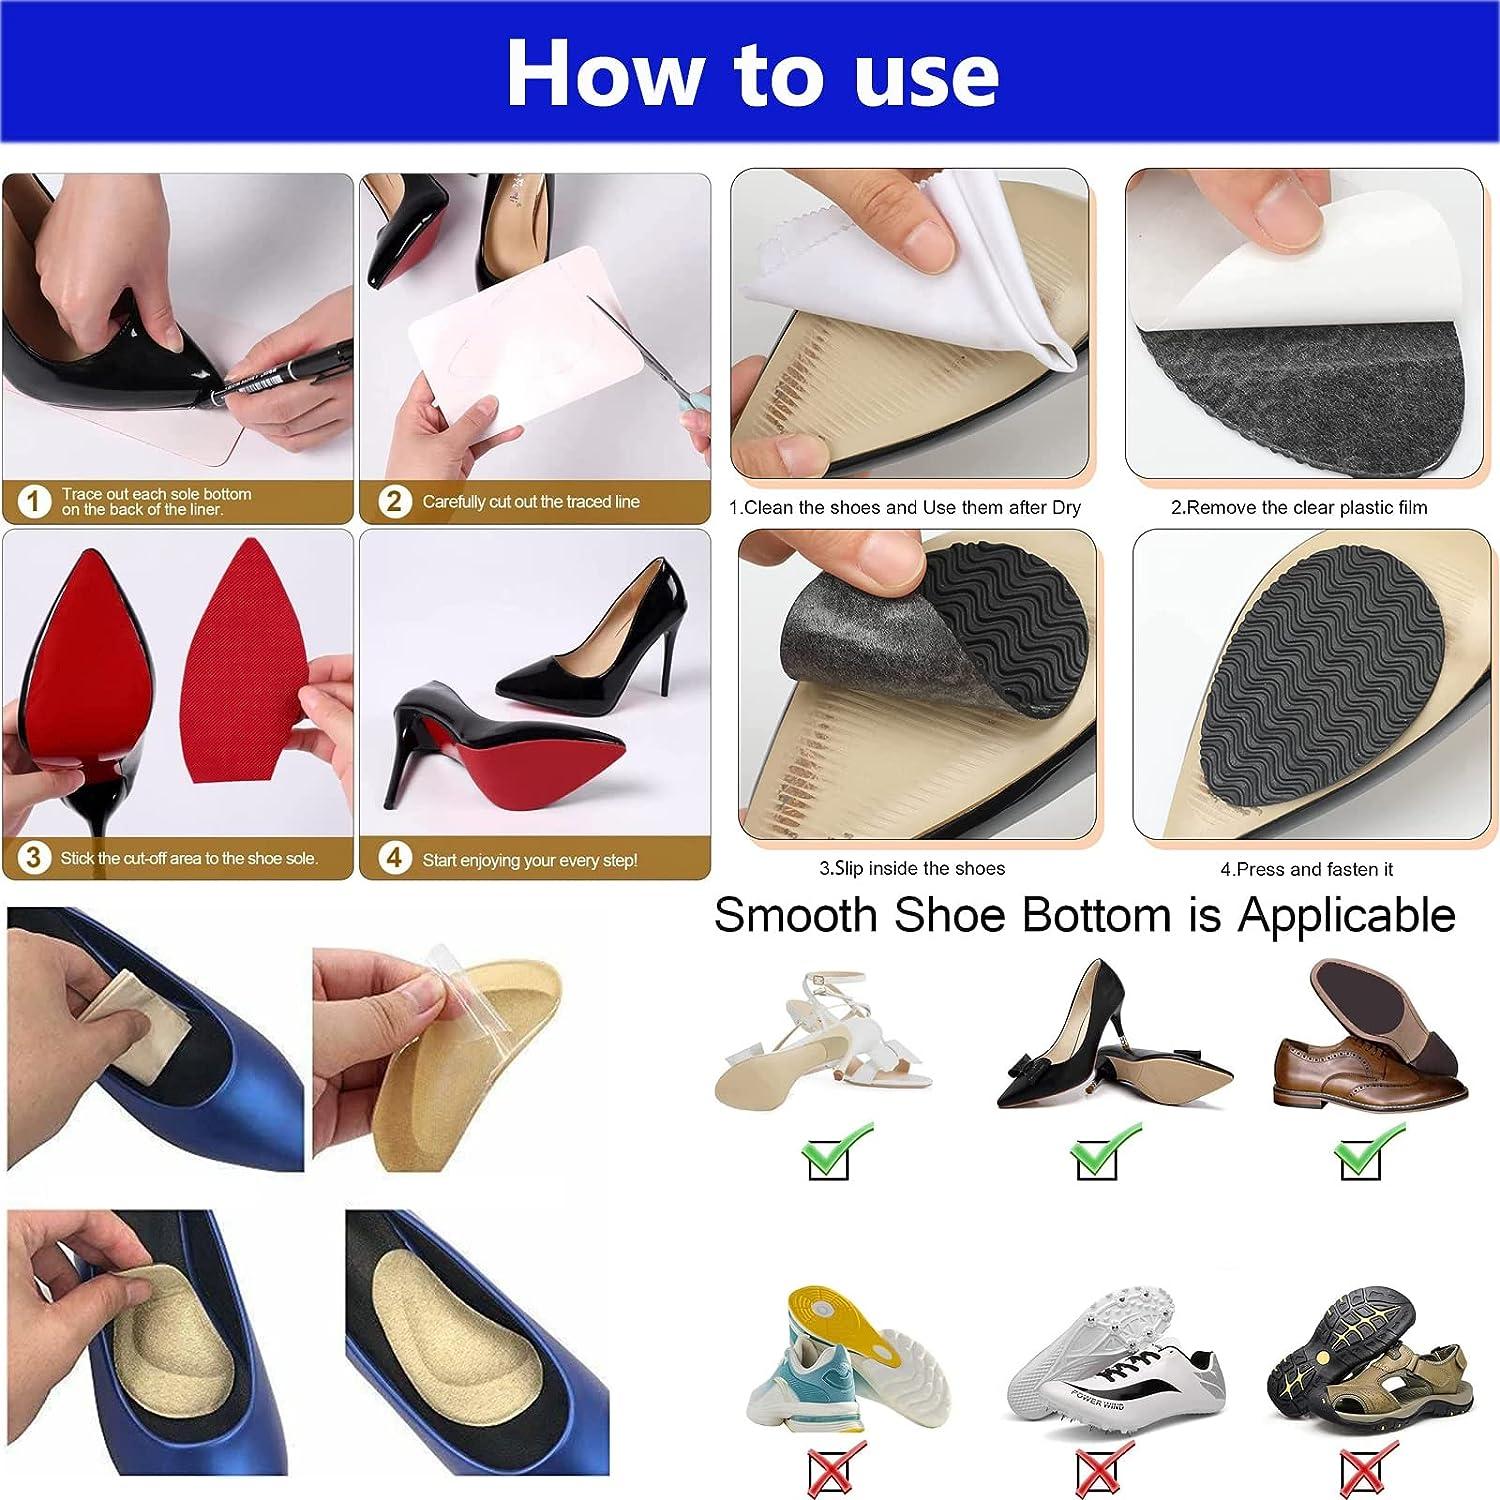 Shoe Sole Protectors for Christian Louboutin Heels, Red Silicone Non-Slip  Self Adhesive Shoes Cover Bottoms, Shoe Bottom and Heel Anti Slip Grip Pads